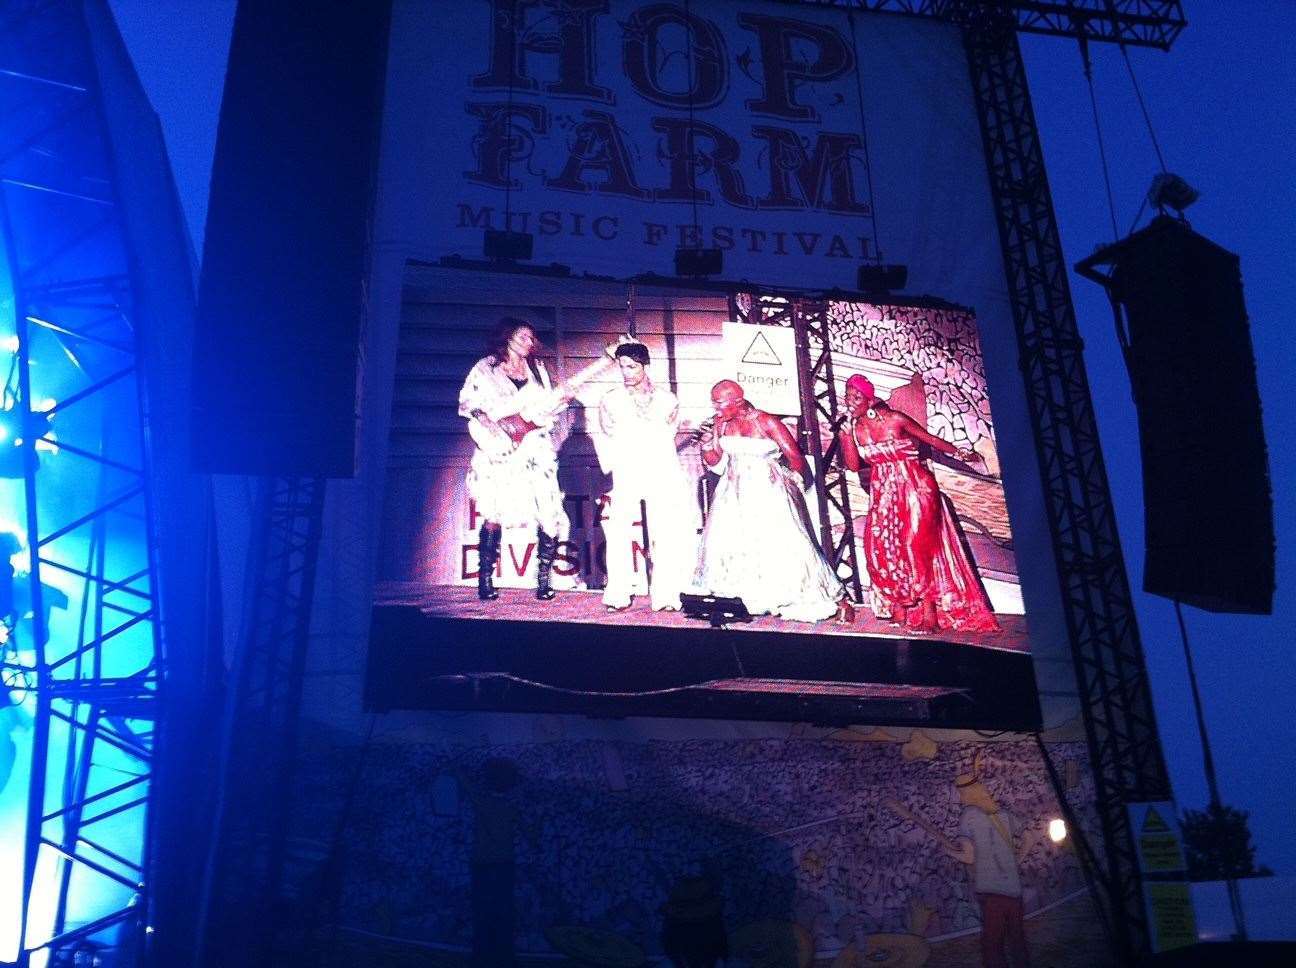 Prince caught on the video screen on the show in 2011